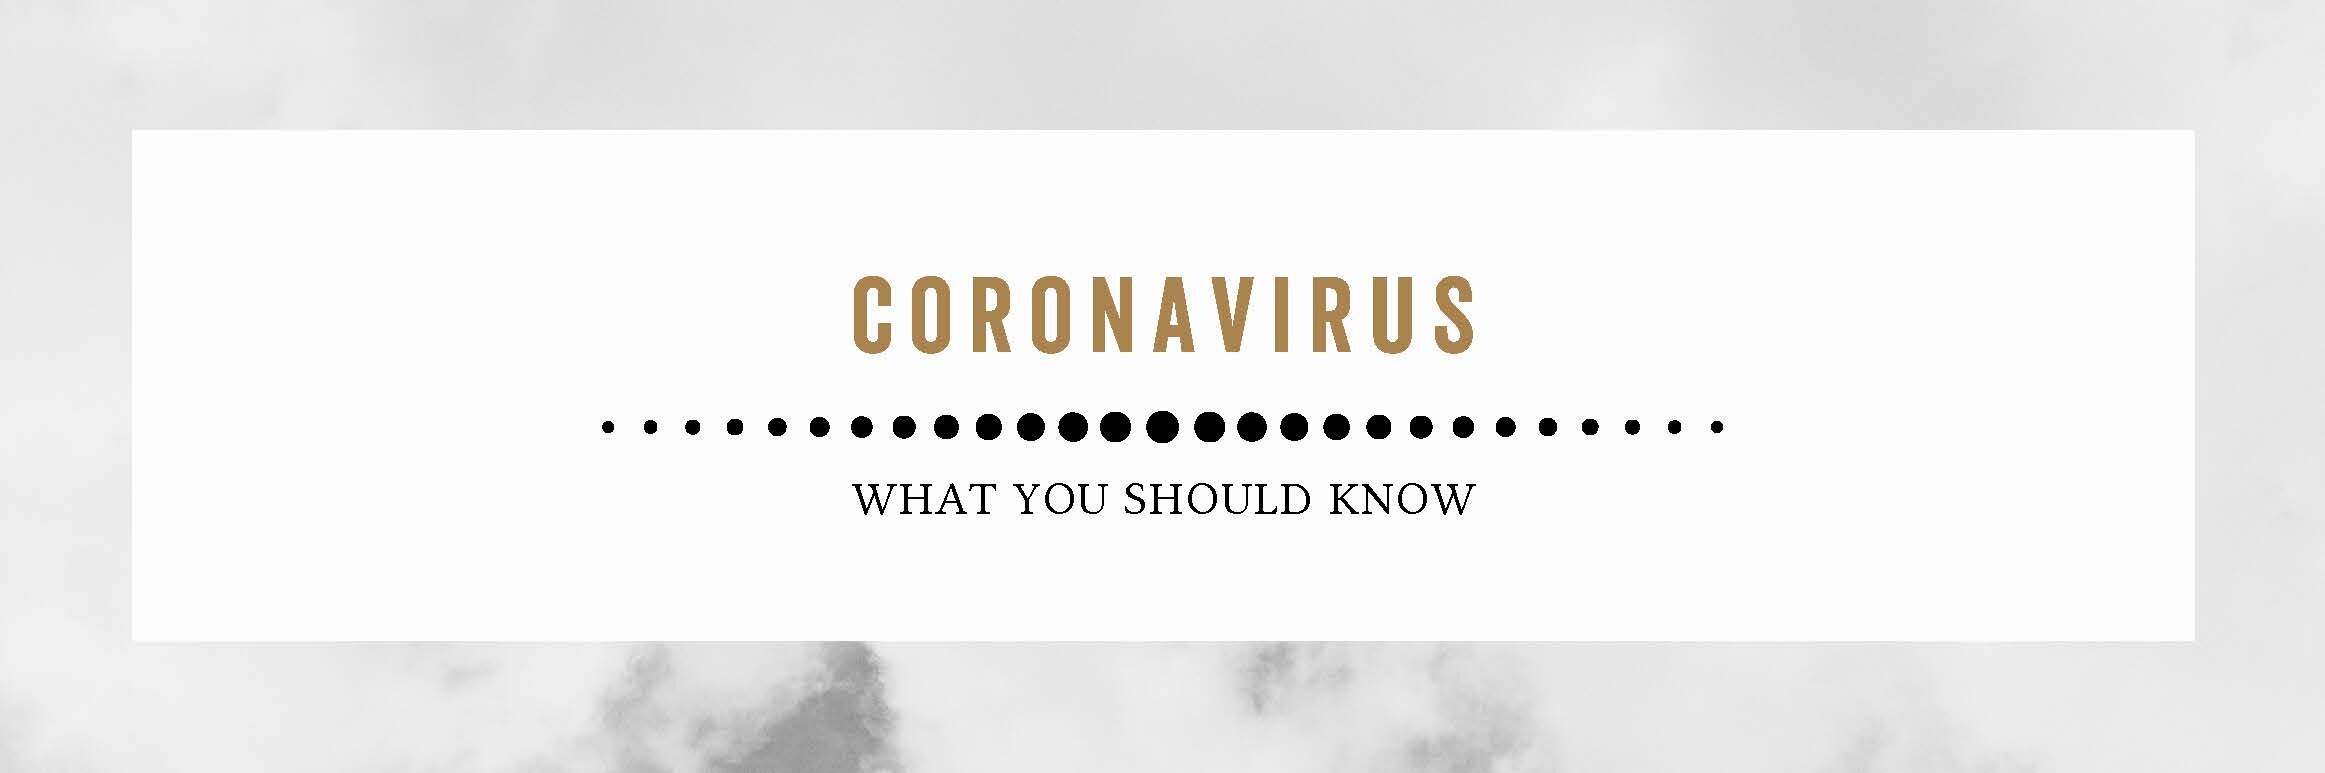 What You Should Know About Coronavirus